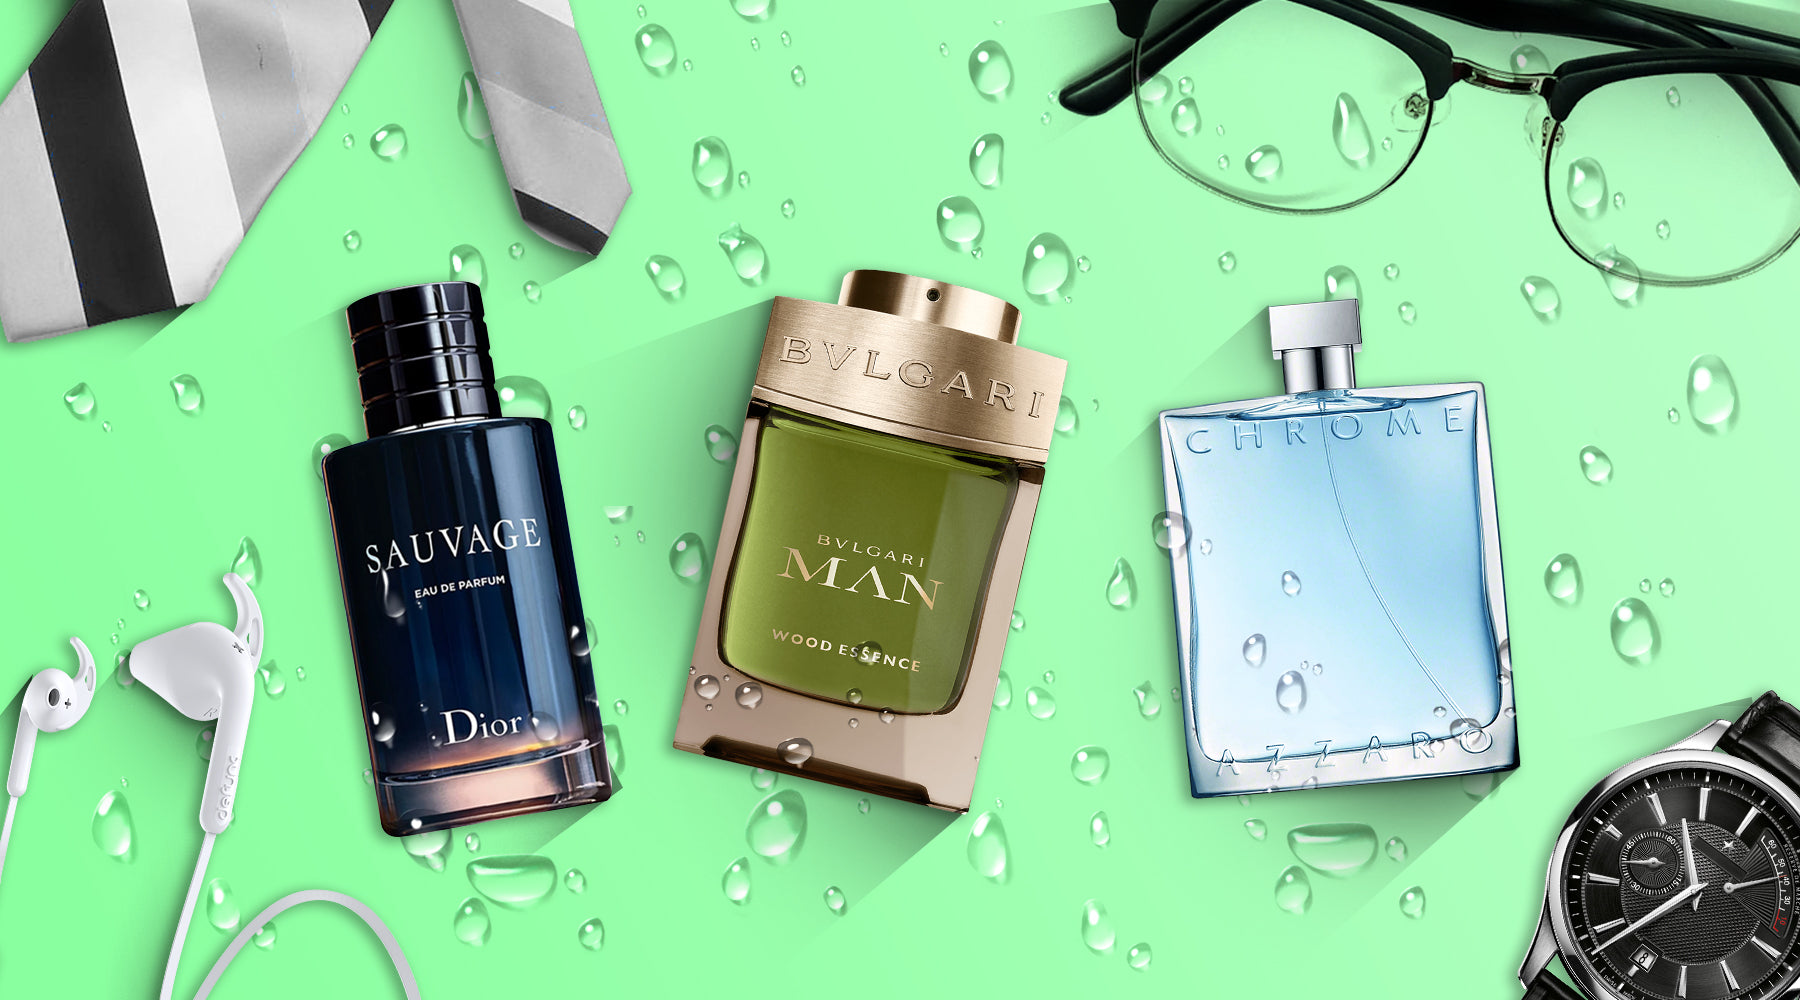 Rainy day perfumes for men in the Philippines